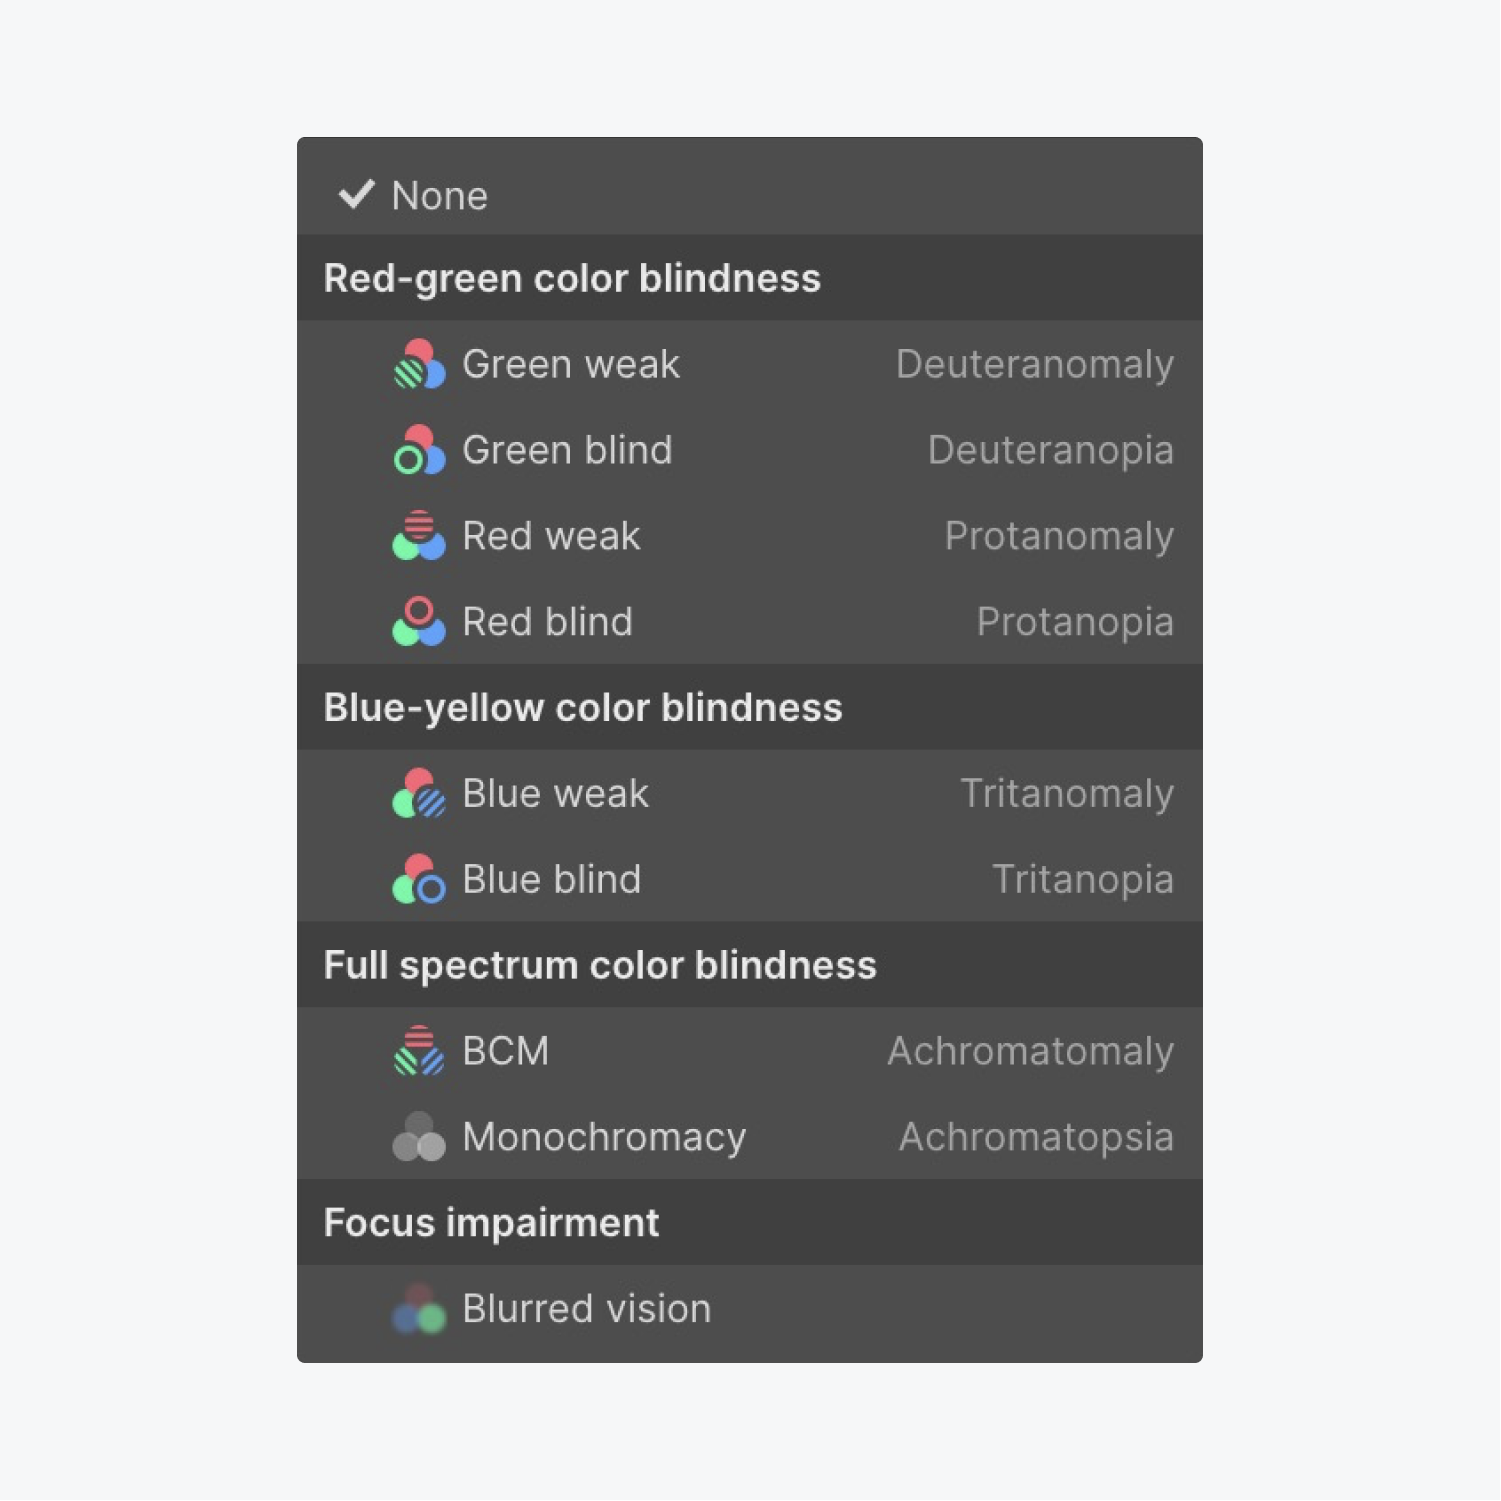 The Vision preview area of the Canvas settings allows you to preview your design from a red-green, blue-yellow and full spectrum color blindness perspective, as well as blurred vision focus impairment.